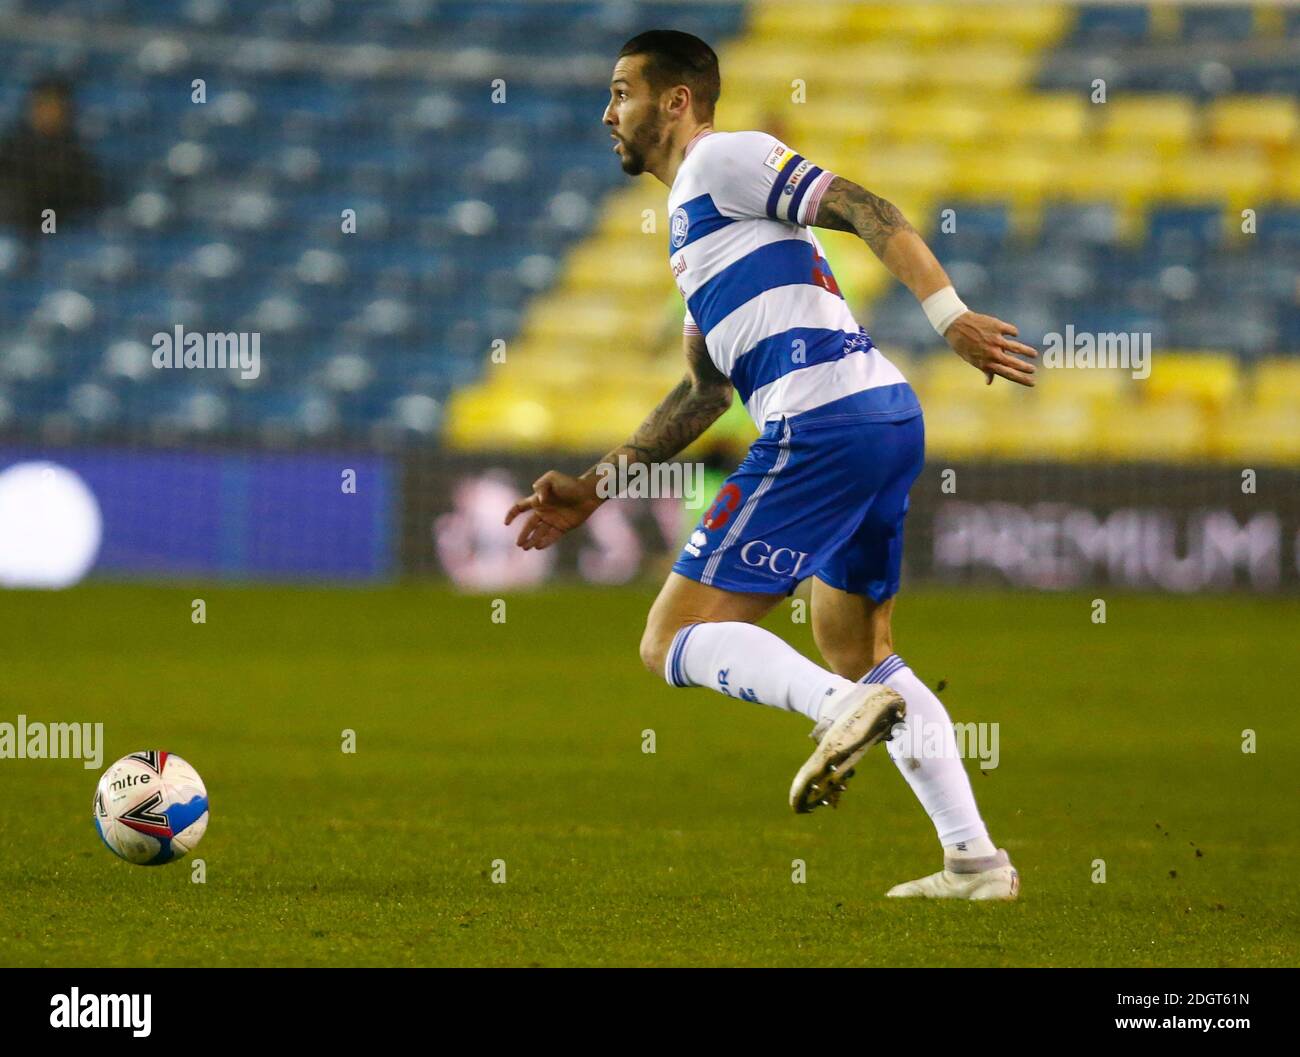 LONDON, United Kingdom, DECEMBER 08: Queens Park Rangers' Geoff Cameron during Sky Bet Championship between Millwall and of Queens Park Rangers at The Stock Photo